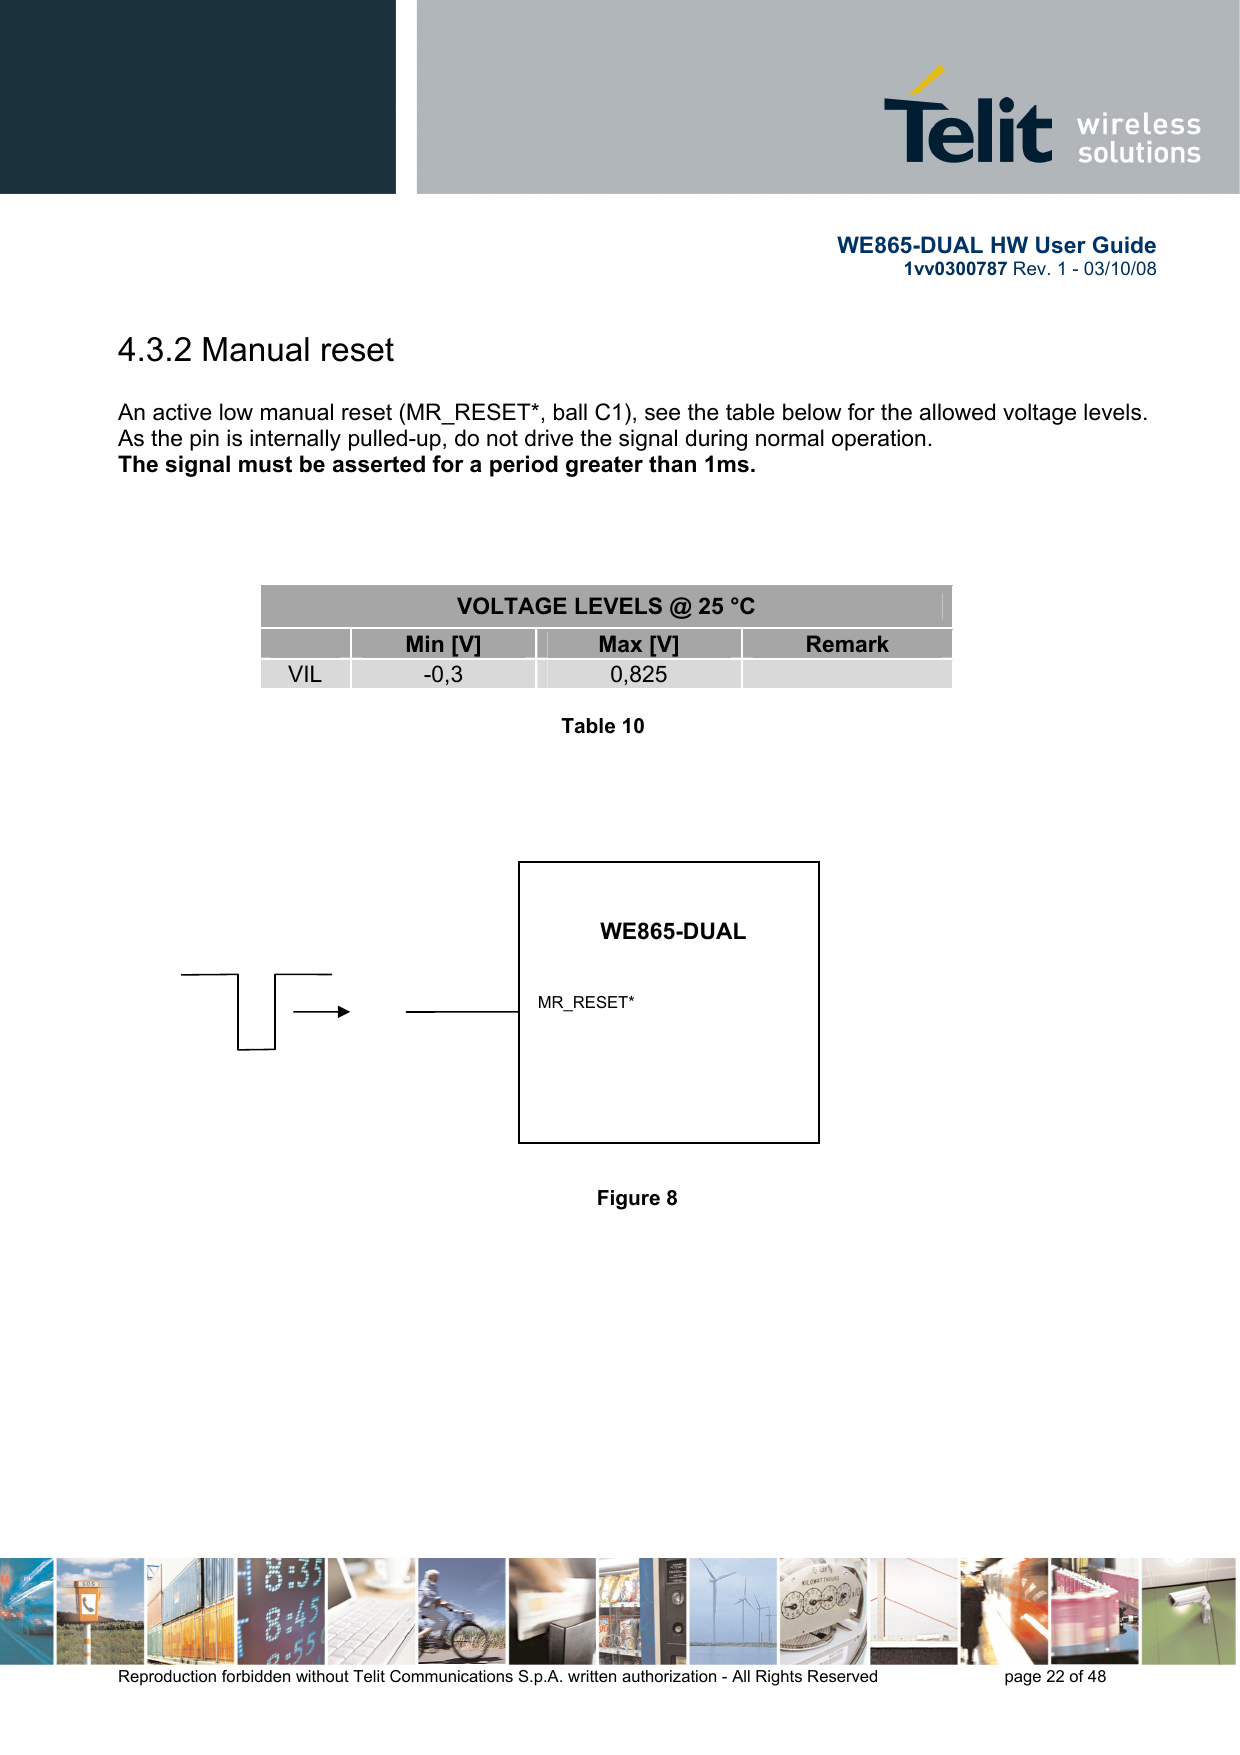       WE865-DUAL HW User Guide 1vv0300787 Rev. 1 - 03/10/08      Reproduction forbidden without Telit Communications S.p.A. written authorization - All Rights Reserved    page 22 of 48  4.3.2 Manual reset  An active low manual reset (MR_RESET*, ball C1), see the table below for the allowed voltage levels. As the pin is internally pulled-up, do not drive the signal during normal operation.  The signal must be asserted for a period greater than 1ms.     VOLTAGE LEVELS @ 25 °C    Min [V]   Max [V]  Remark VIL  -0,3  0,825     Table 10               Figure 8             WE865-DUAL MR_RESET* 